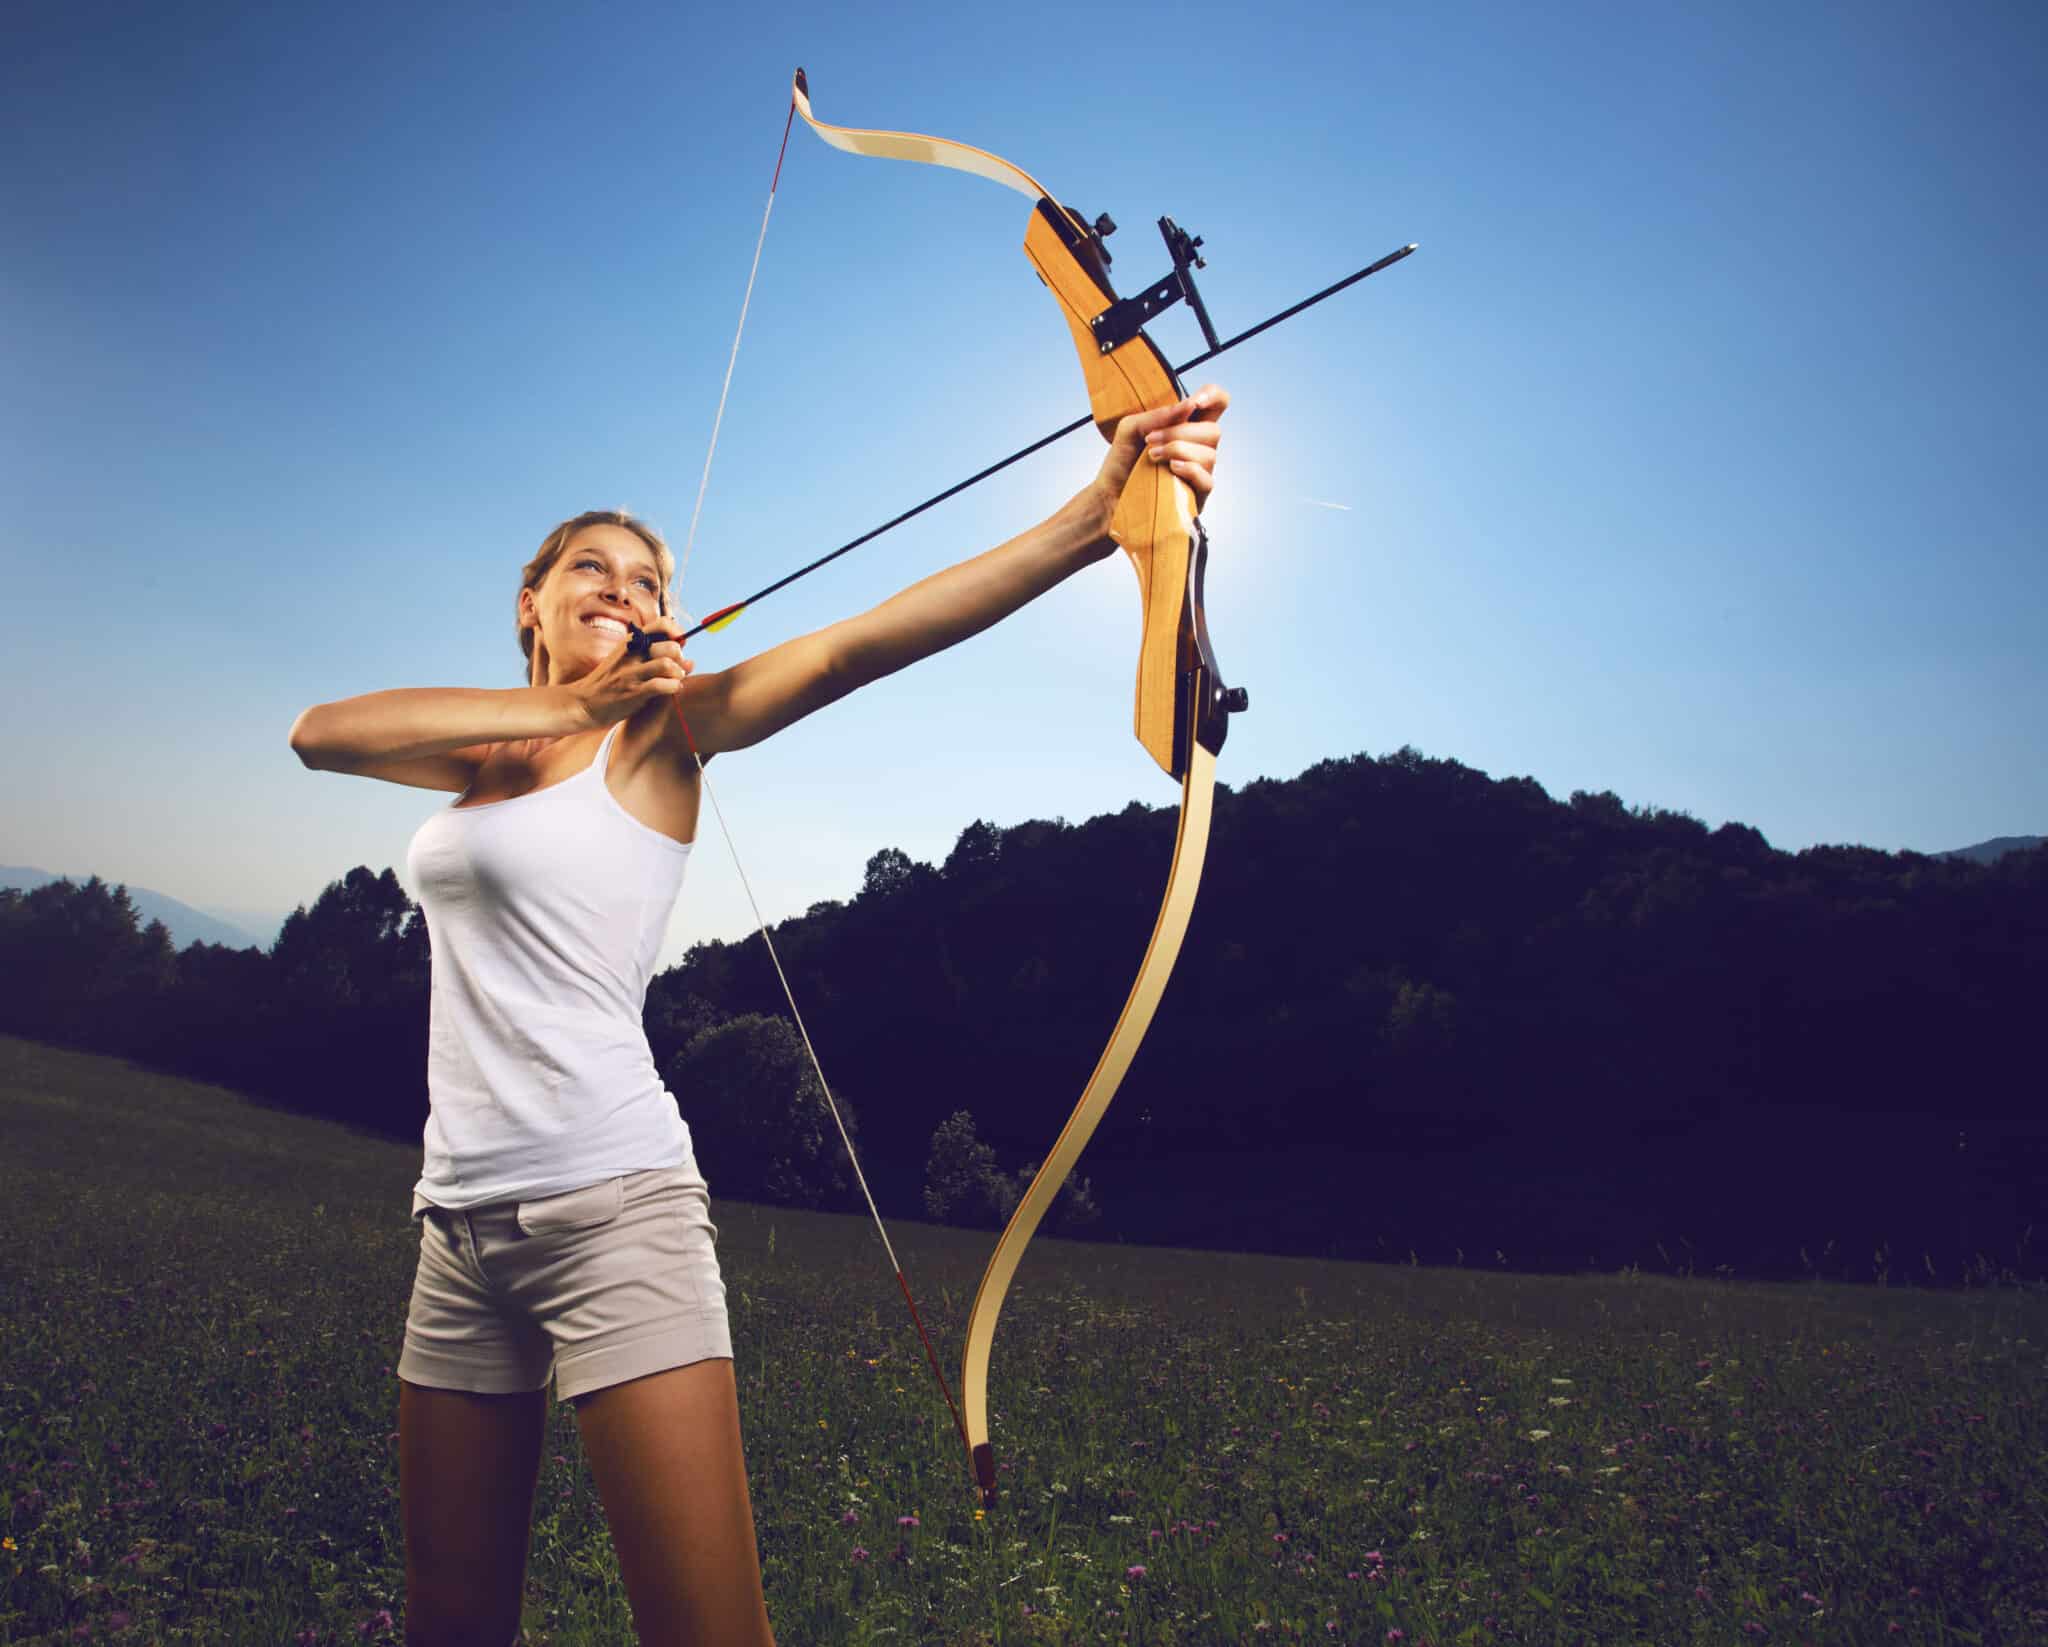 Field Archery: For Those Who Love Extreme Sports and Elegance